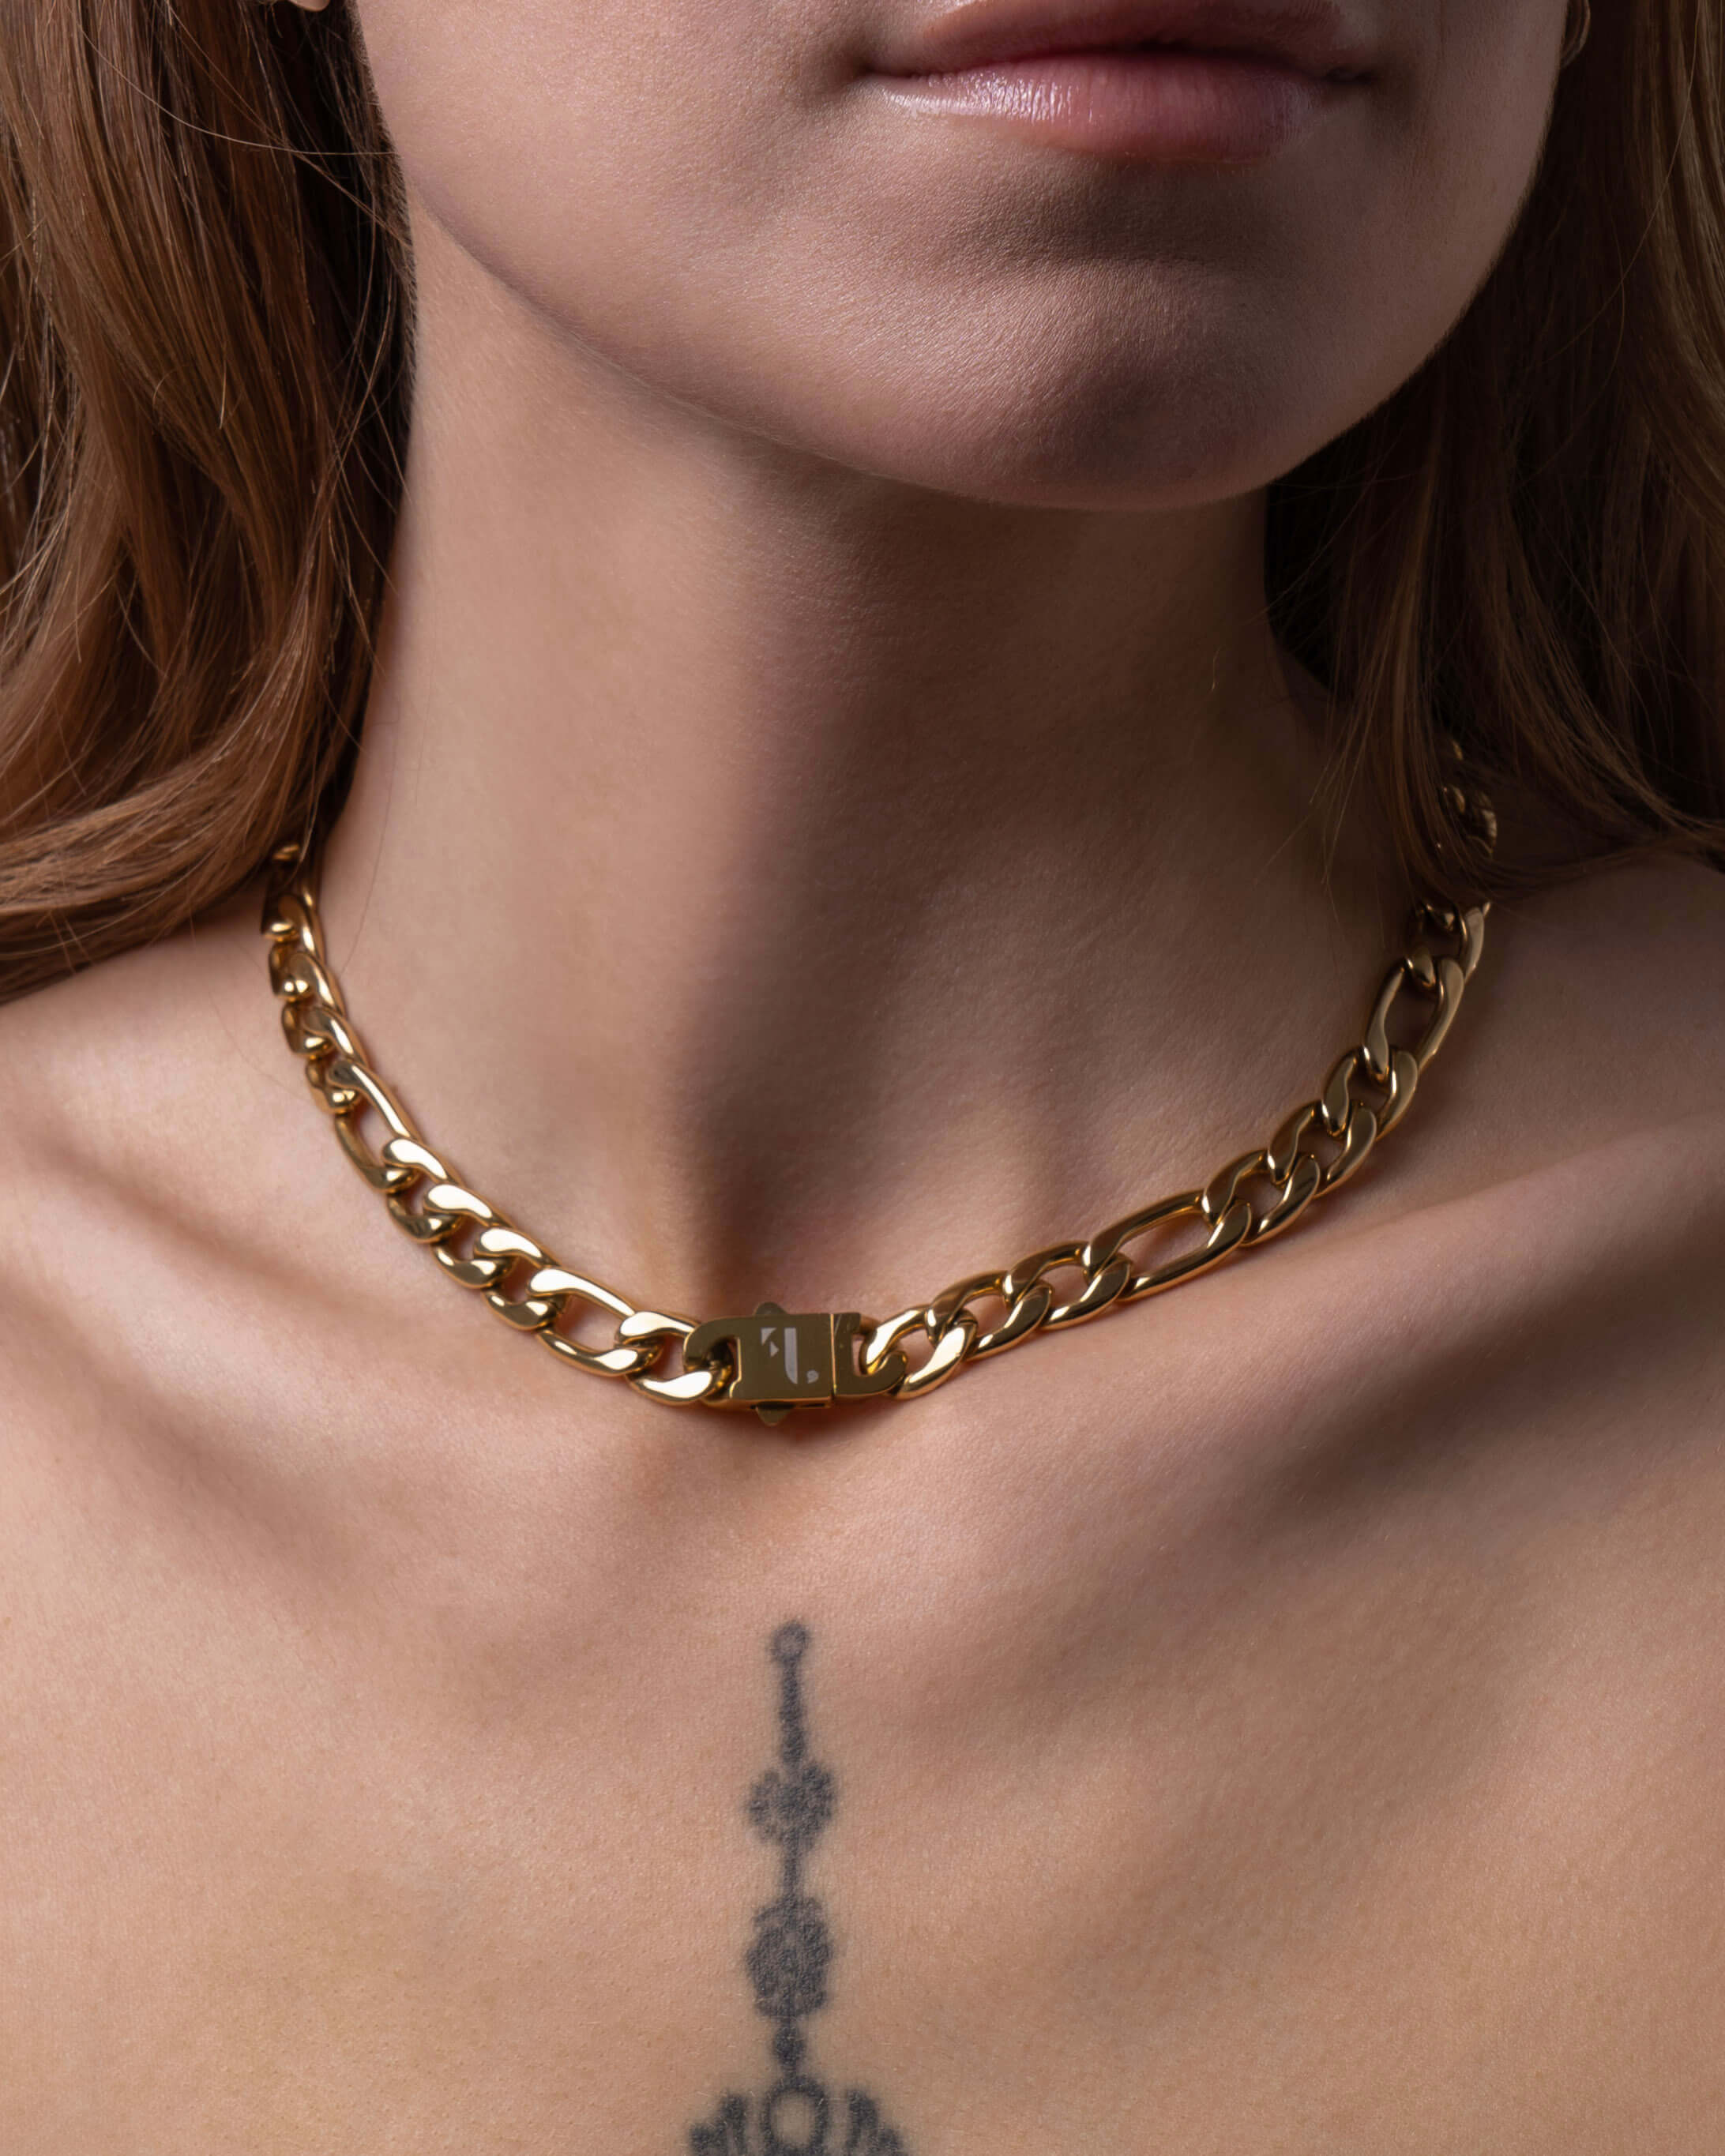 Berg women's necklace by Five Jwlry, featuring a bold 9mm smooth figaro chain in 14k gold, made from water-resistant 316L stainless steel. Offered in sizes 45cm and 50cm. Hypoallergenic with a 2-year warranty.